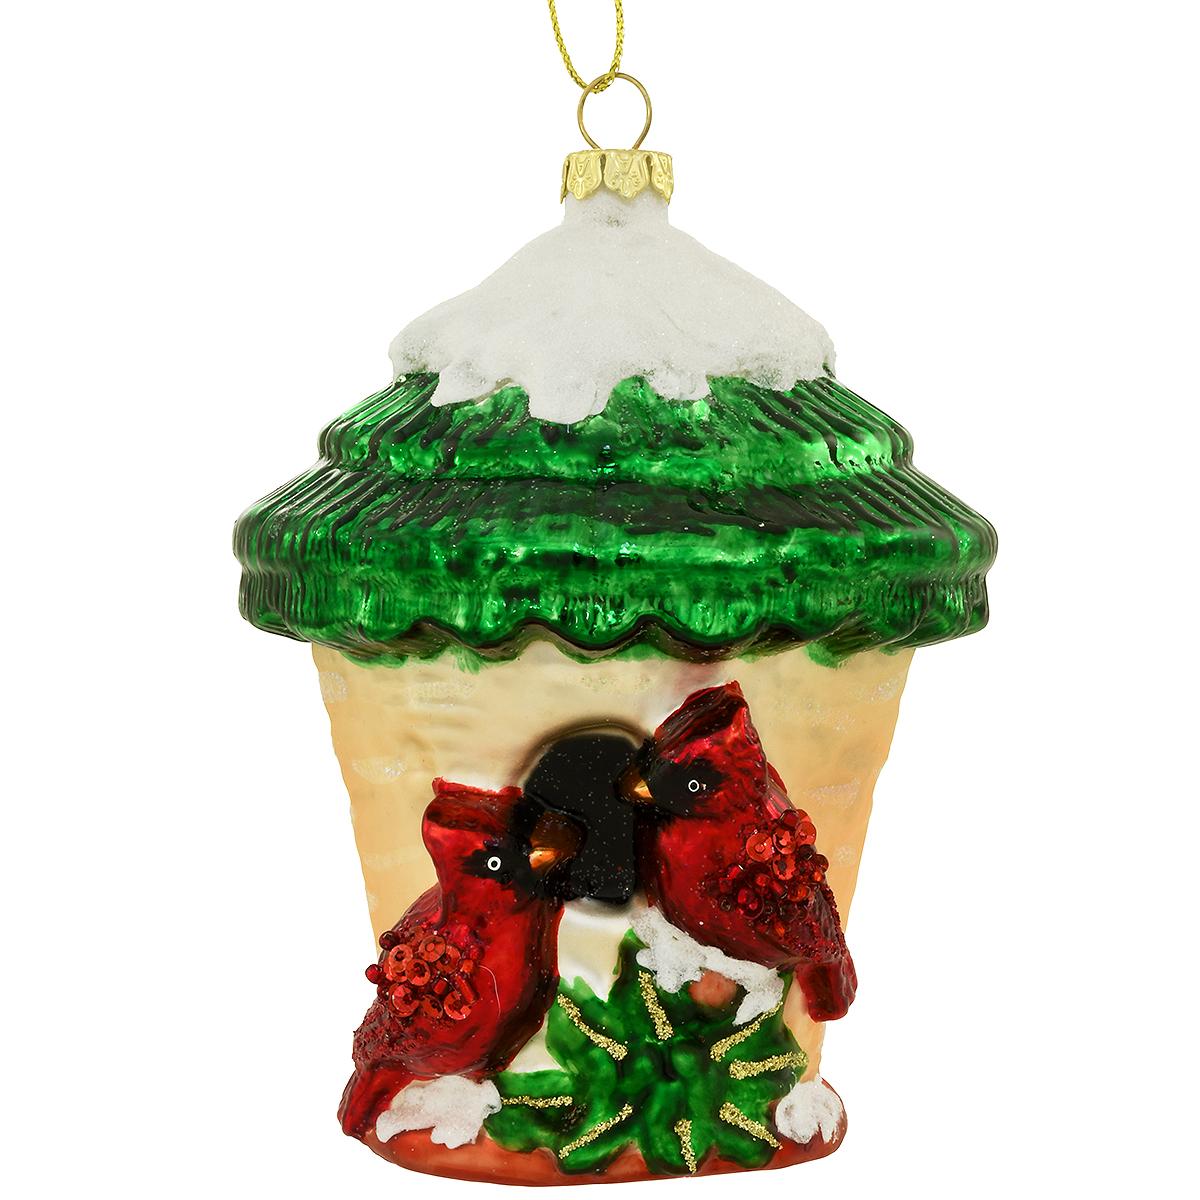 Birdhouse With Cardinals Ornament